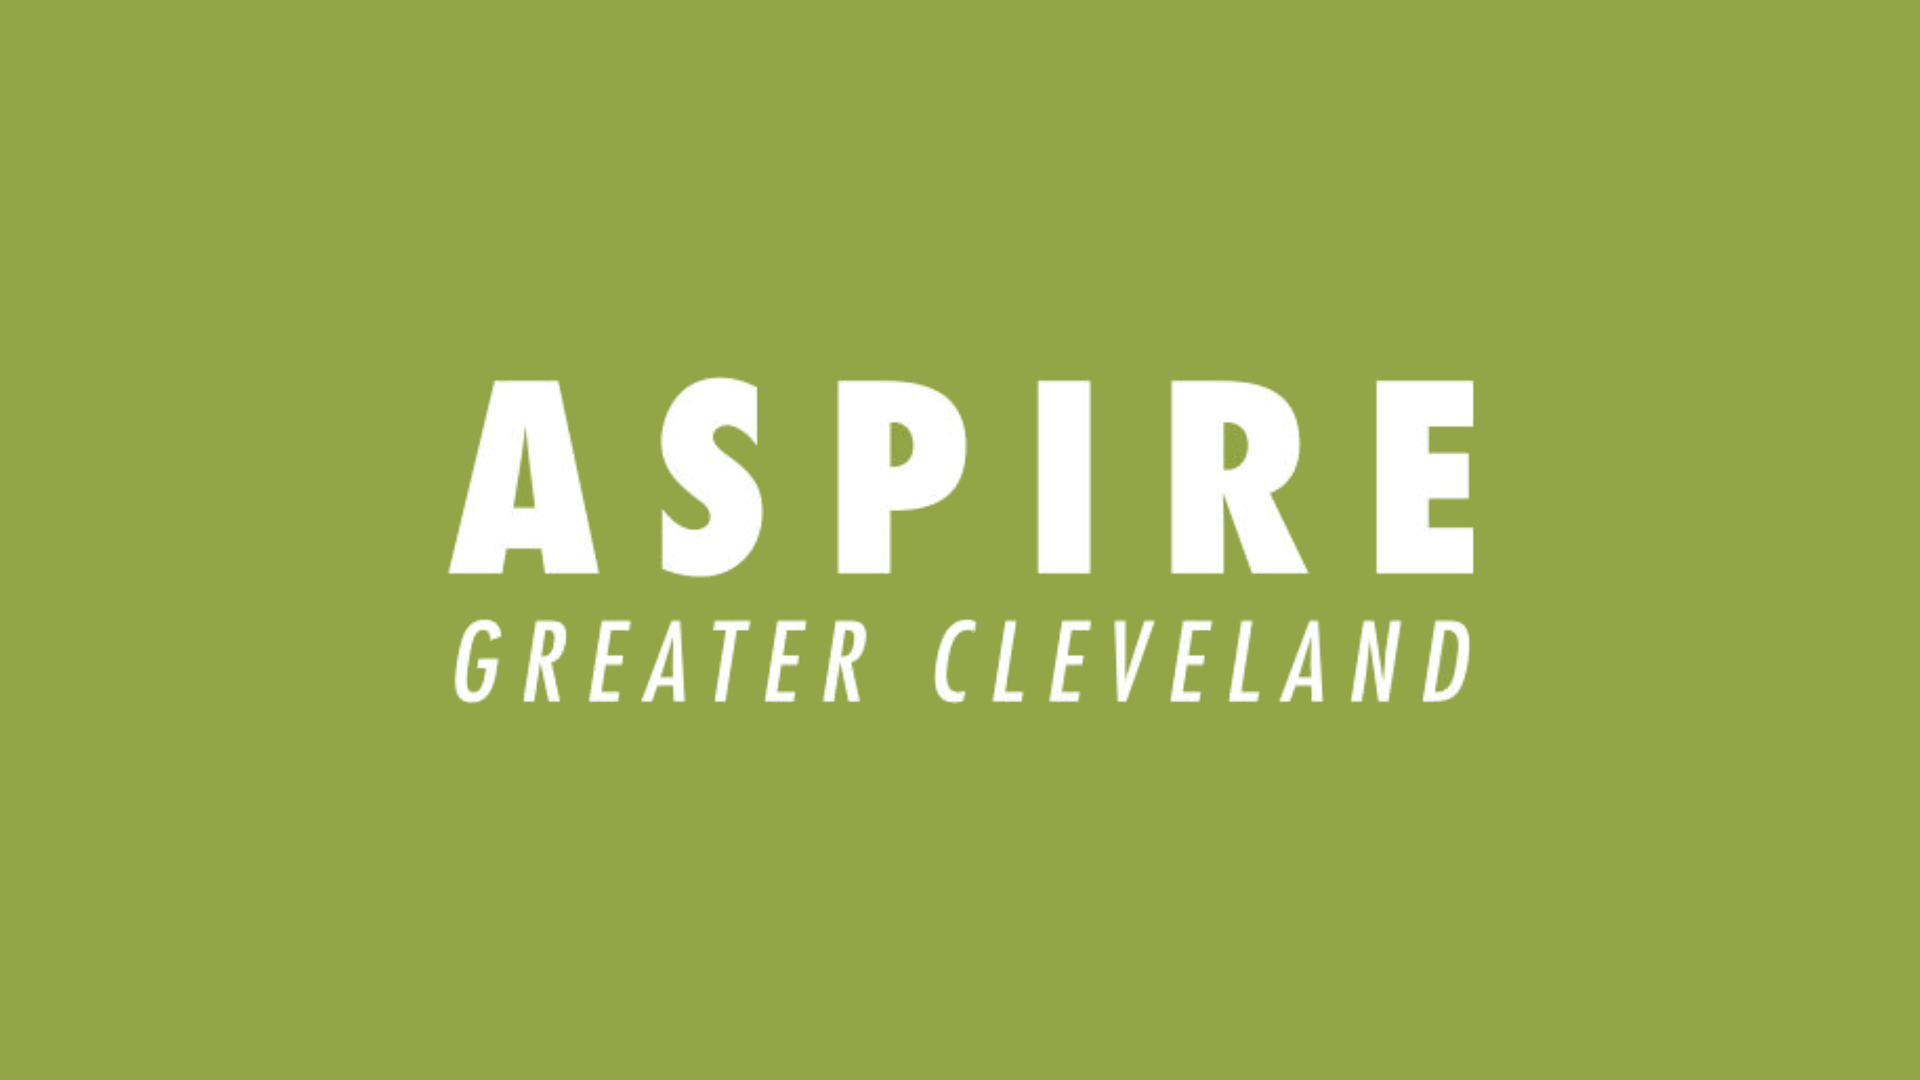 Aspire Greater Cleveland